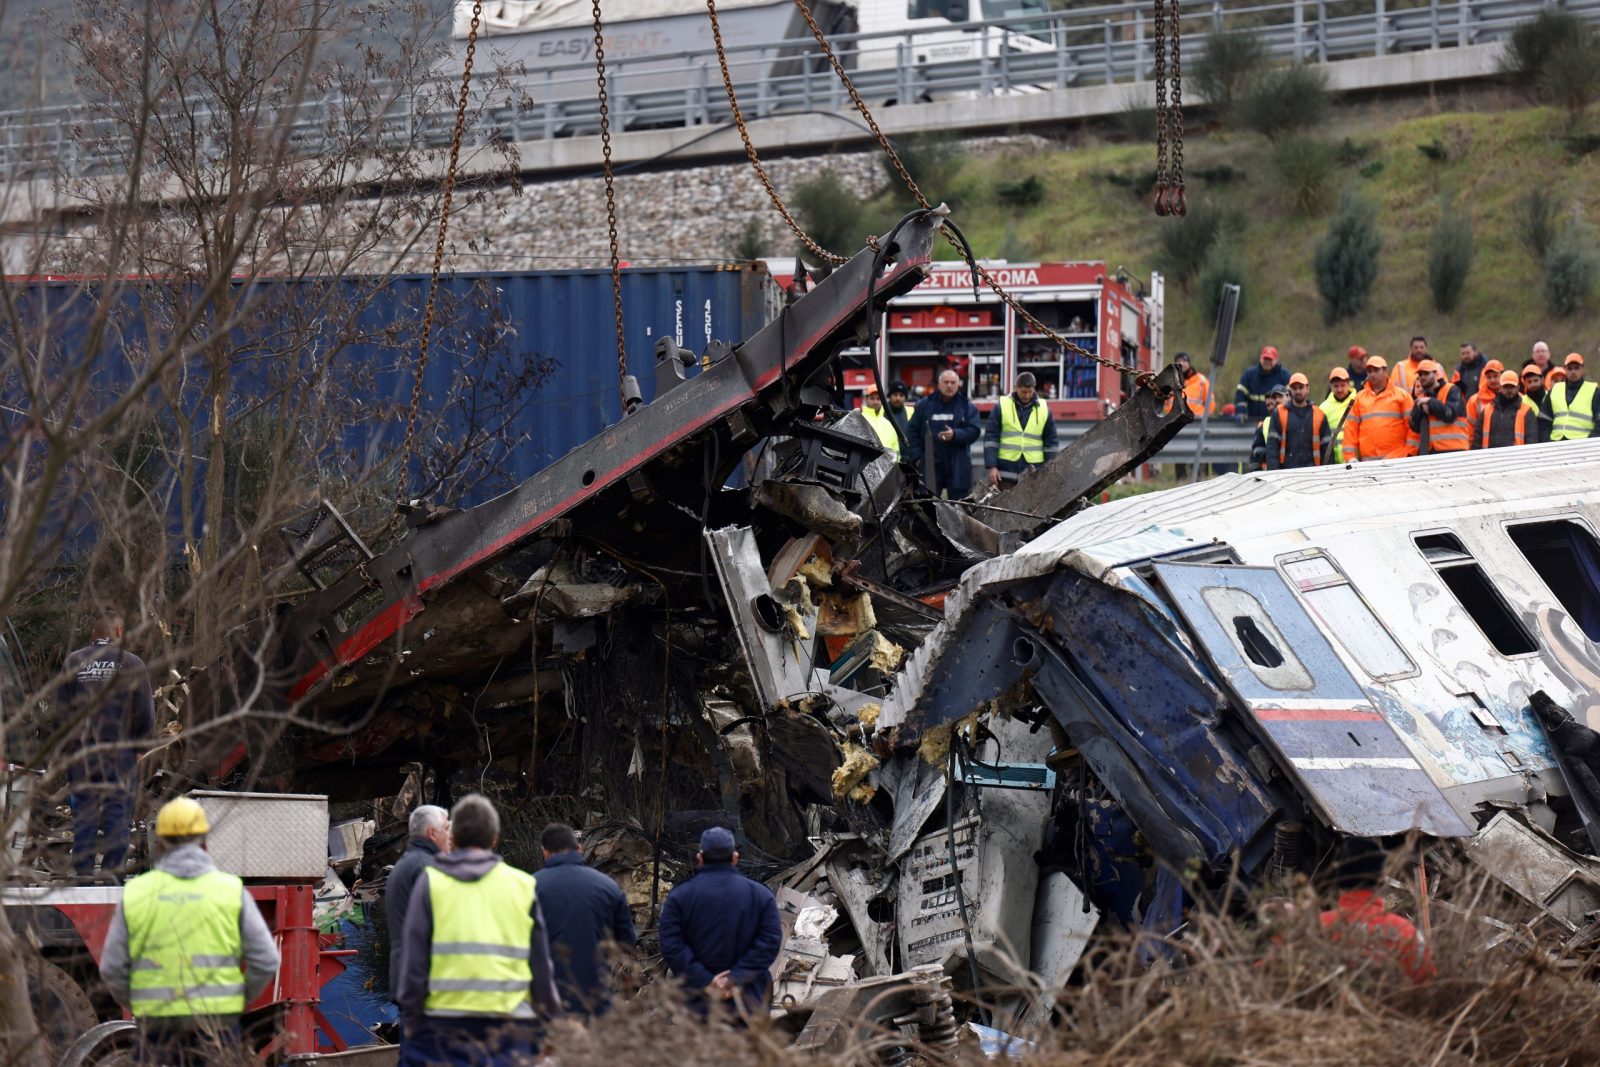 epa10496519 Crane vehicles try to remove pieces of damaged train wagon after a collision near Larissa city, Greece, 01 March 2023. The number of confirmed dead from the deadly train collision at Tempi rises to 36 on Wednesday 01 March morning as the search-and-rescue operation continues, according to the latest update from the fire brigade spokesperson Vasilis Vathrakogiannis. The number of injured in hospital increased to 66, of which six were admitted to ICUs. The search of the wreckage is ongoing, with efforts focused on the first three carriages of the passenger train which overturned, with the assistance of specialised truck-mounted cranes.  EPA/ACHILLEAS CHIRAS